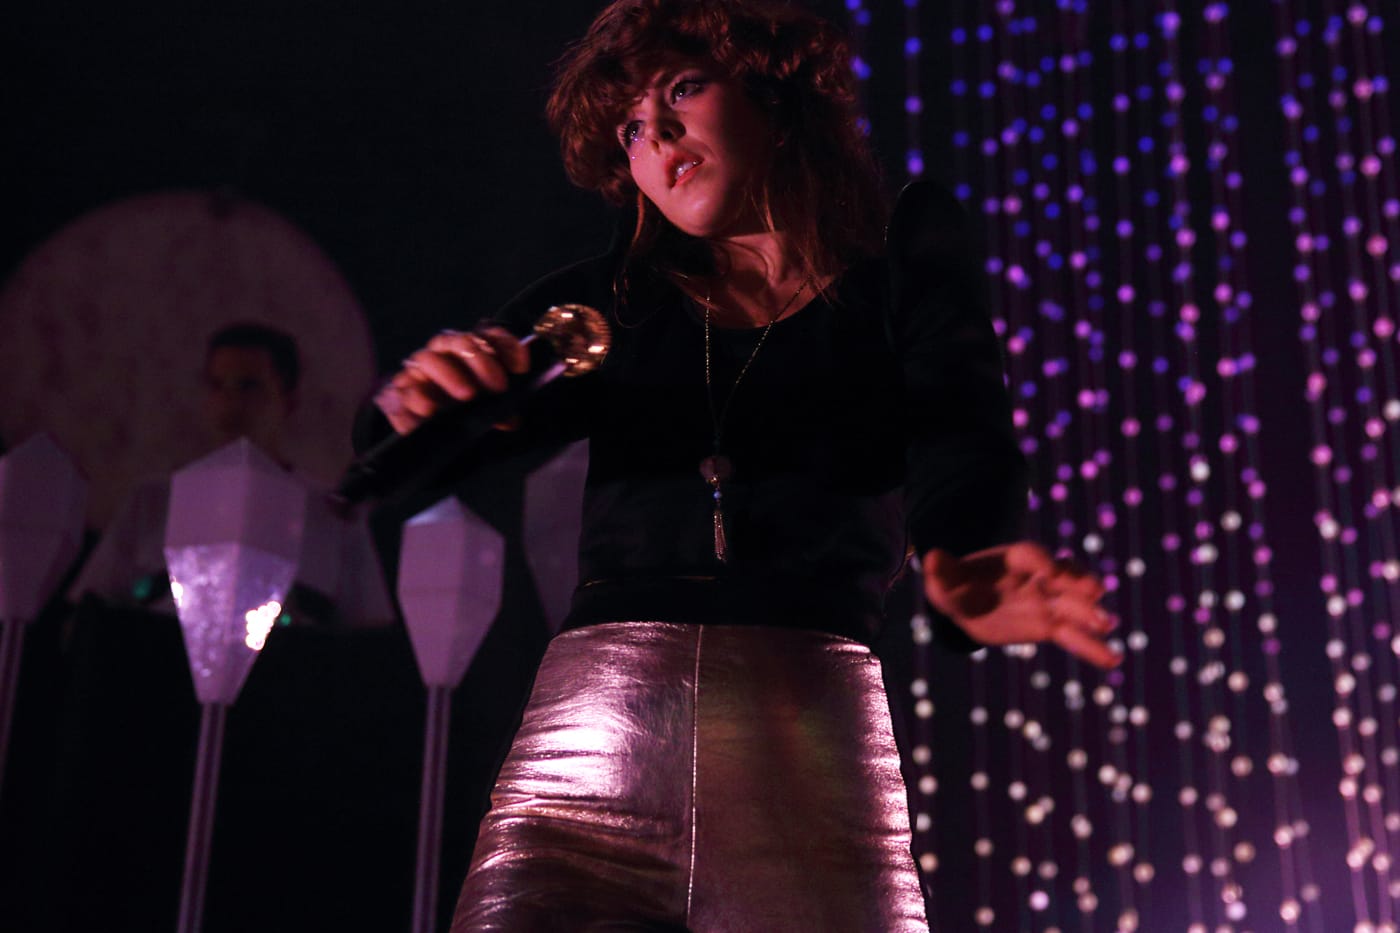 10 Things You Might Not Know About Purity Ring